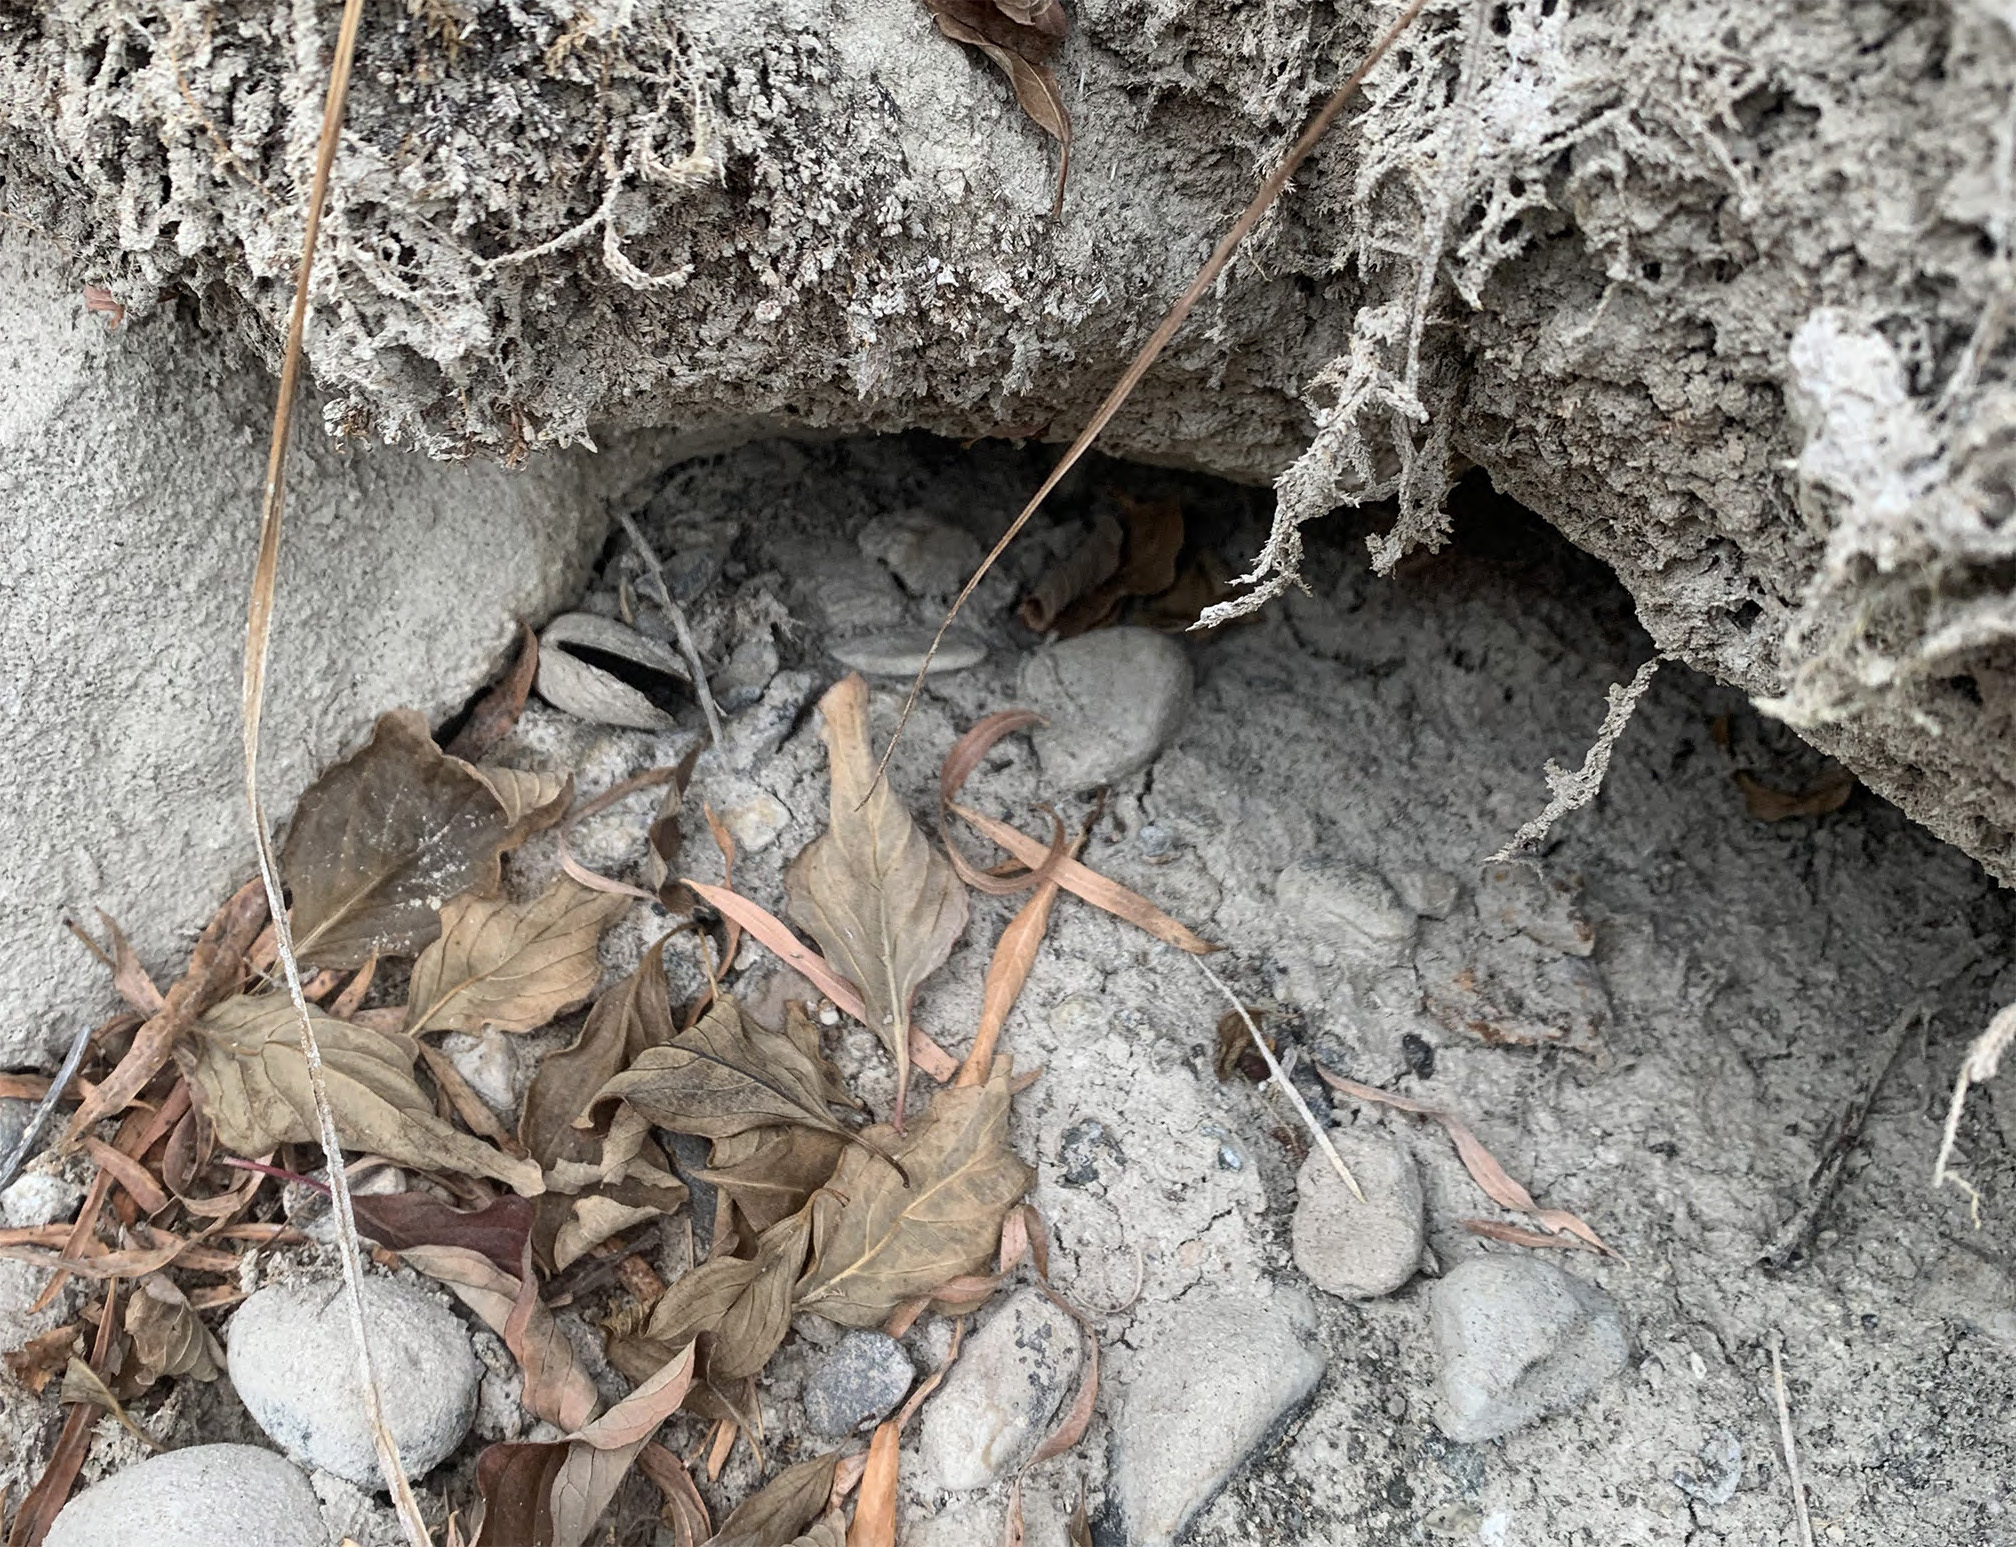 This photo shows a dried up creek bed. The mud is gray, hard, and cracked. On it is scattered dead, brown leaves and gray stones. There is one dead mussel, its shell open and empty, the two halves colored by the dry mud.